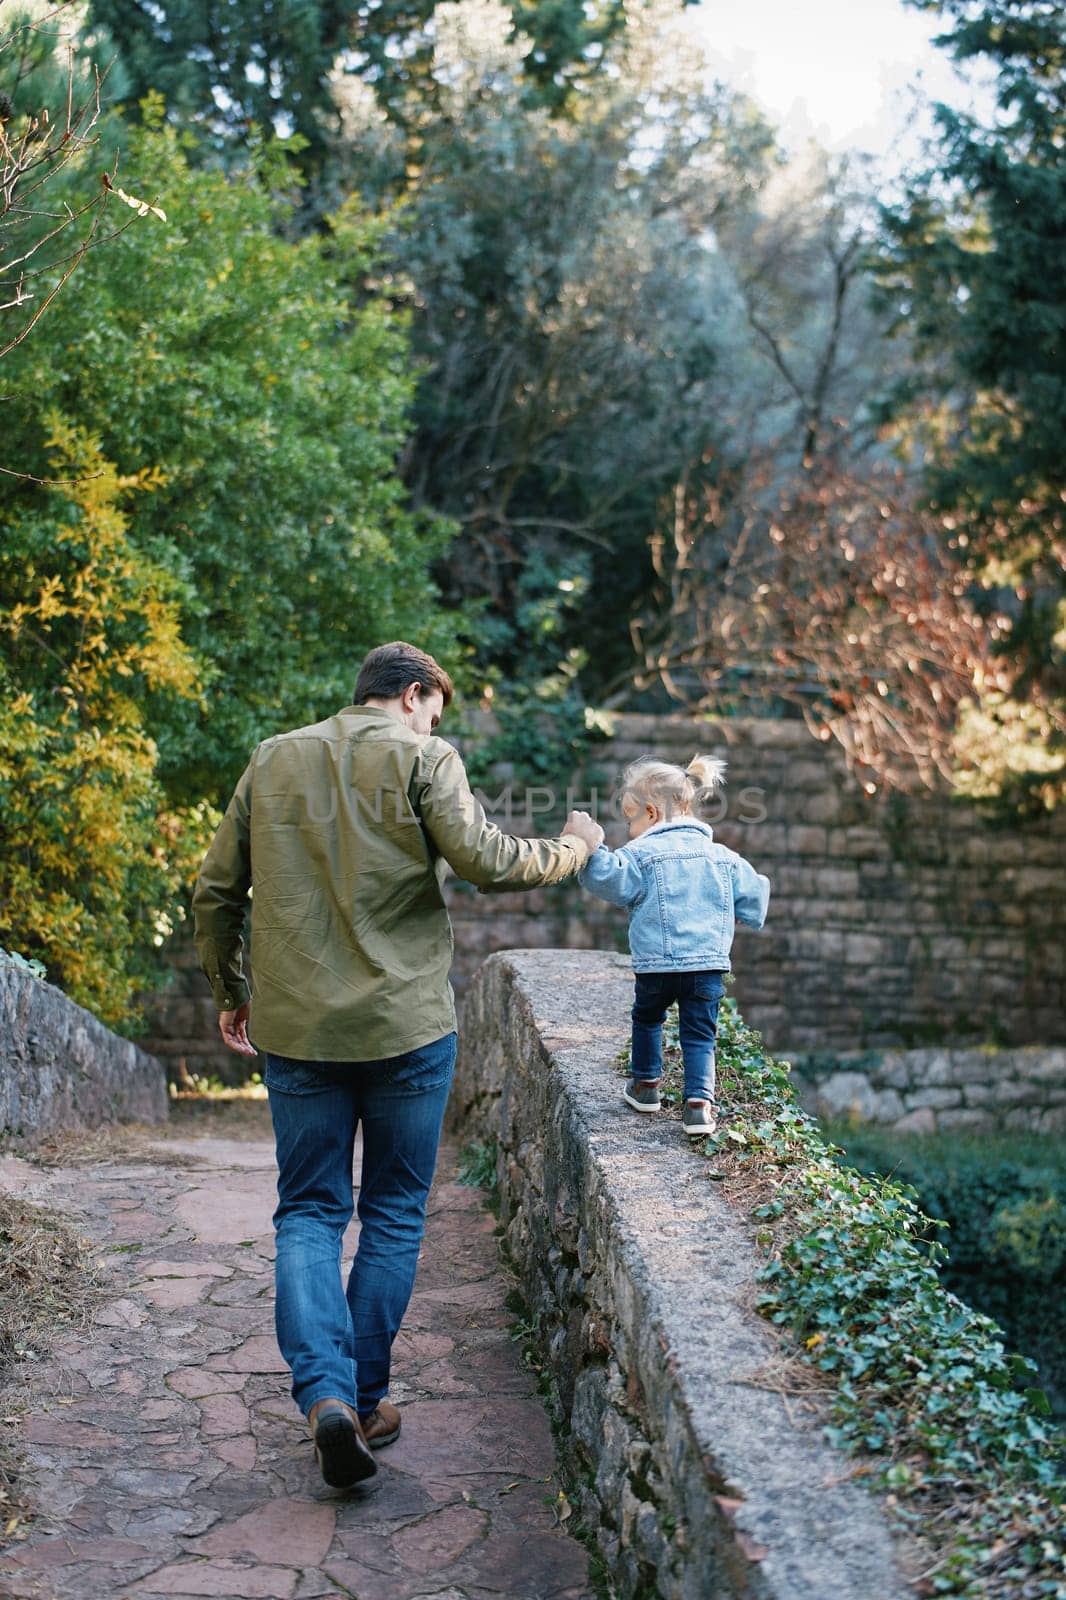 Dad leads a little girl by the hand along a stone fence walking along a paved path in the park. Back view. High quality photo